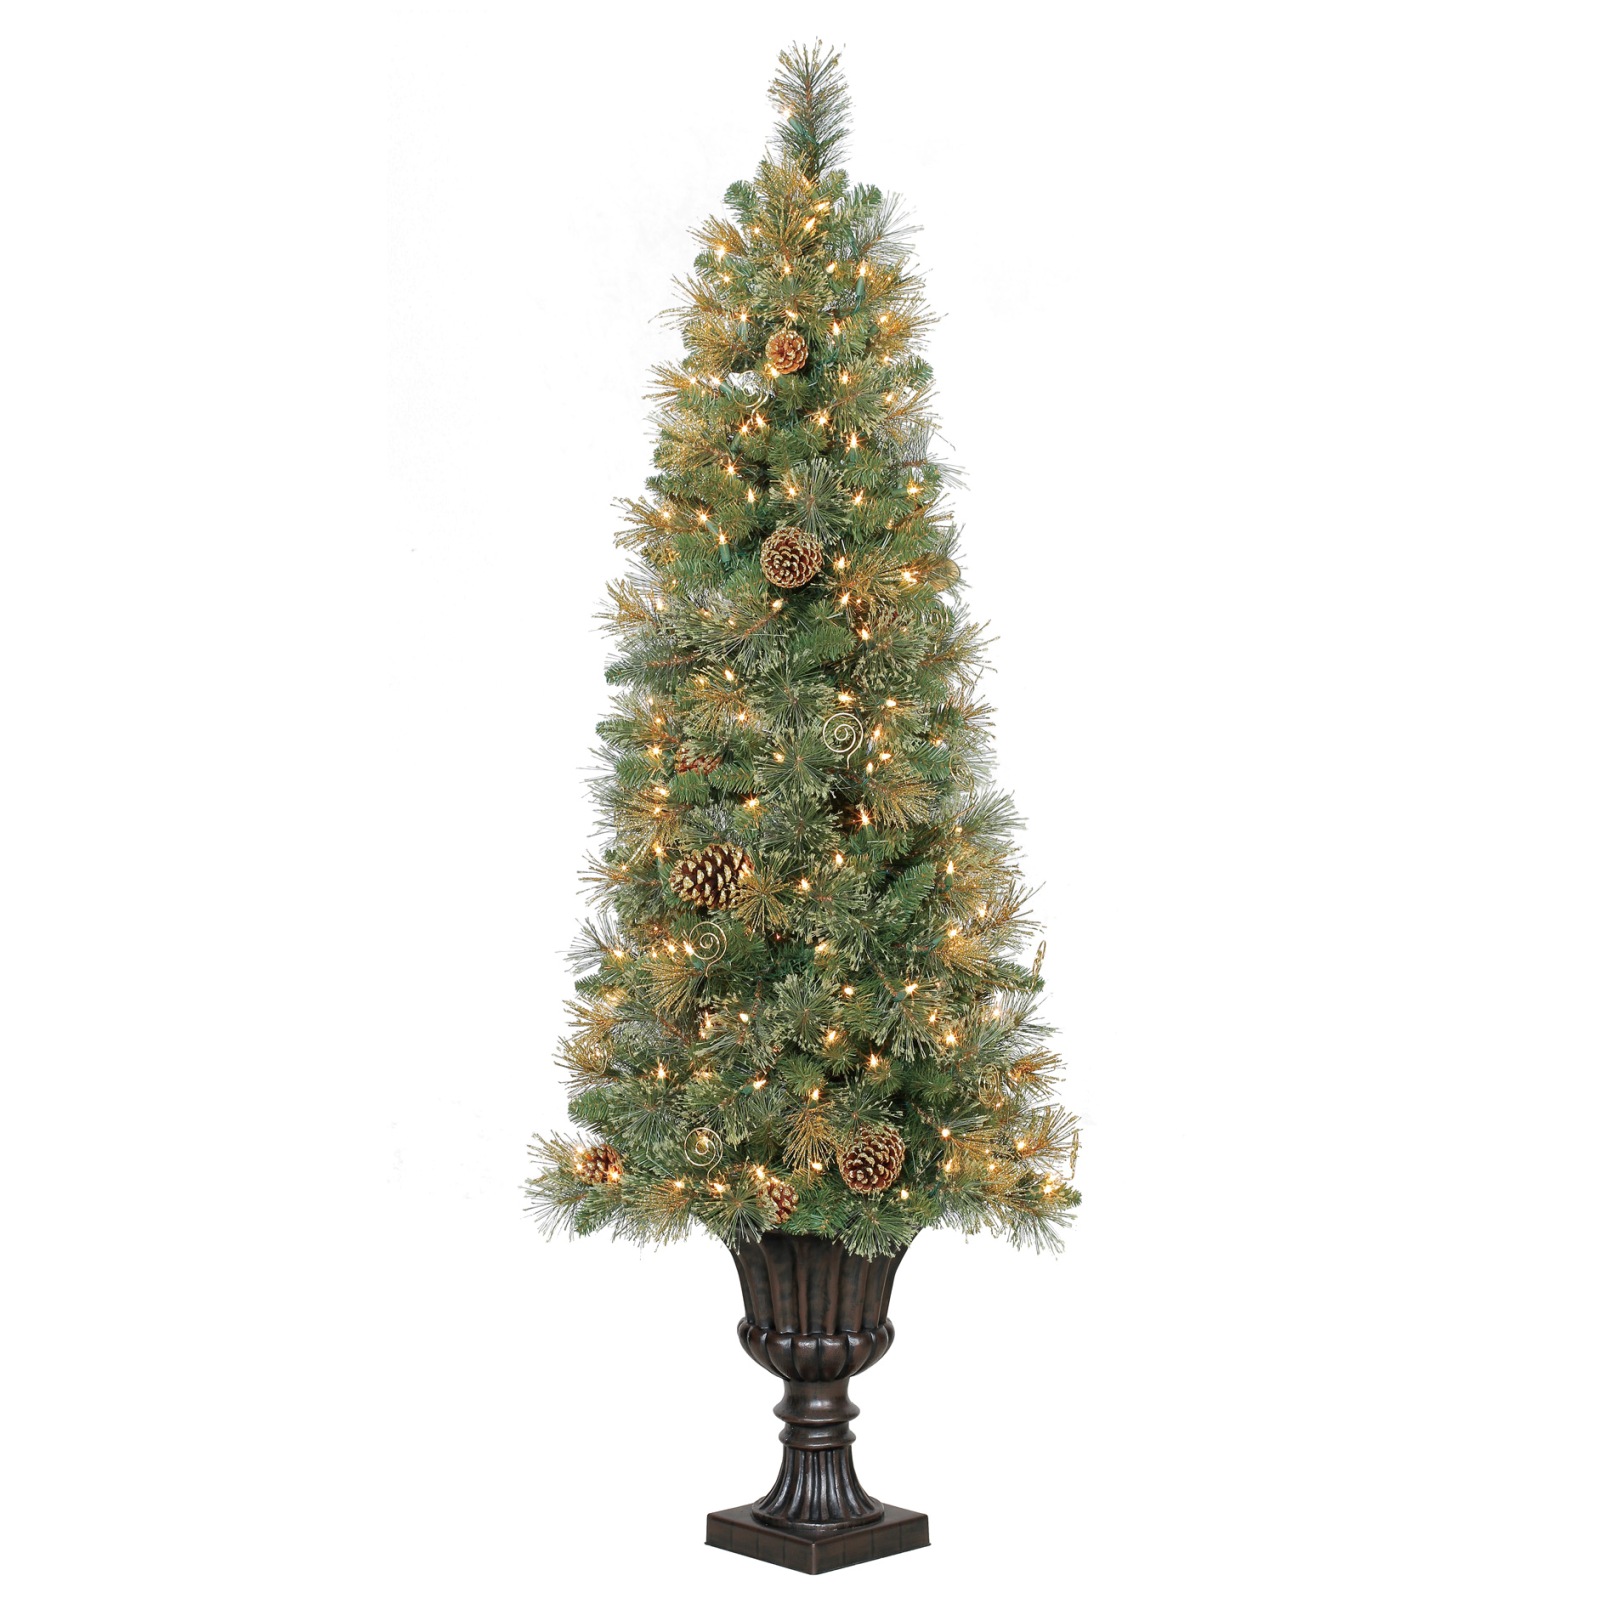 Hallmark 5.5' Christmas Grand Balsam Glitter Cashmere Decorated Potted Tree